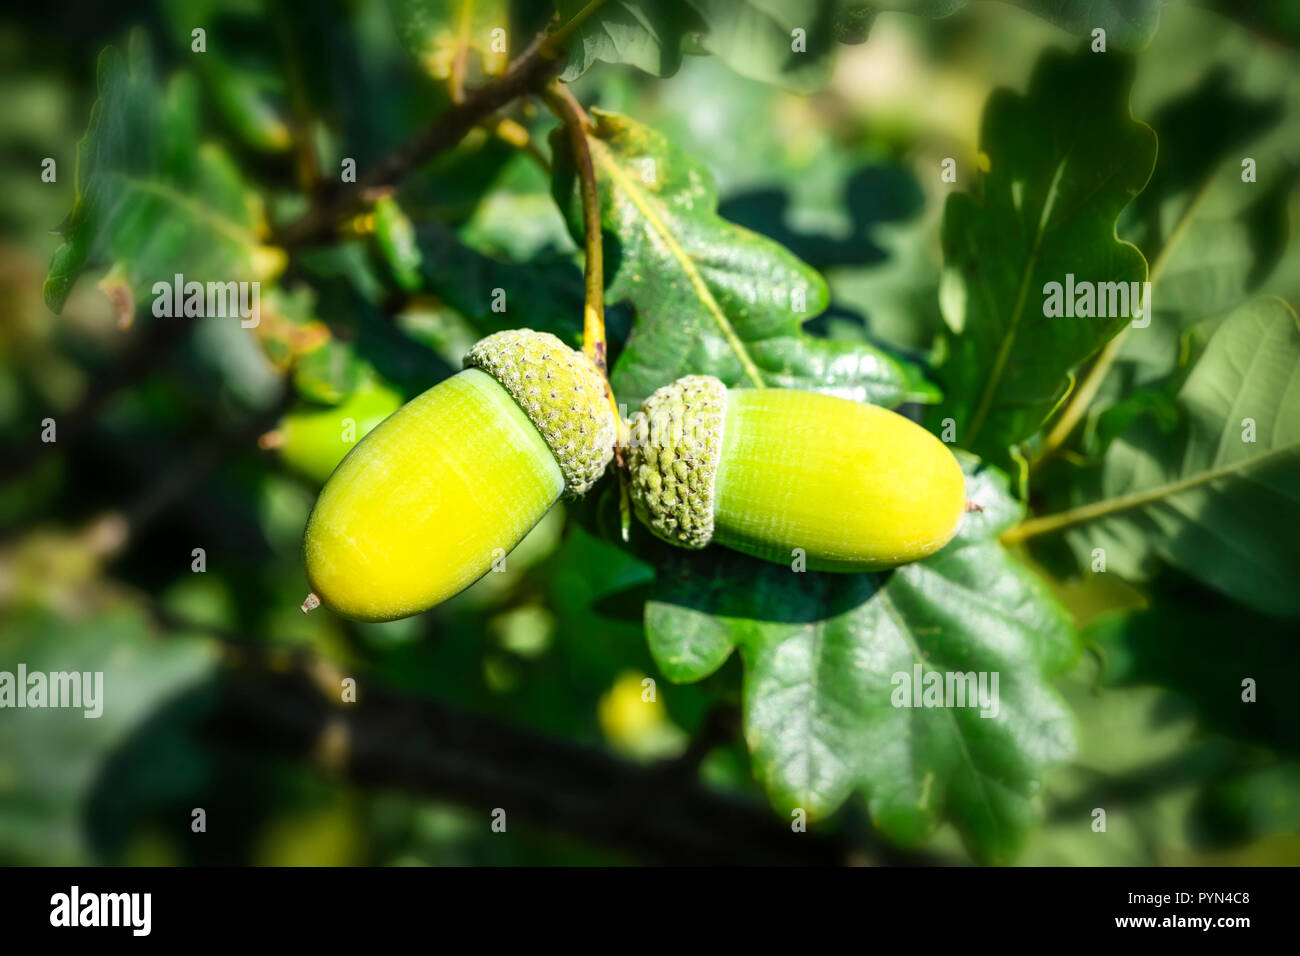 Frucht Eichel High Resolution Stock Photography and Images - Alamy